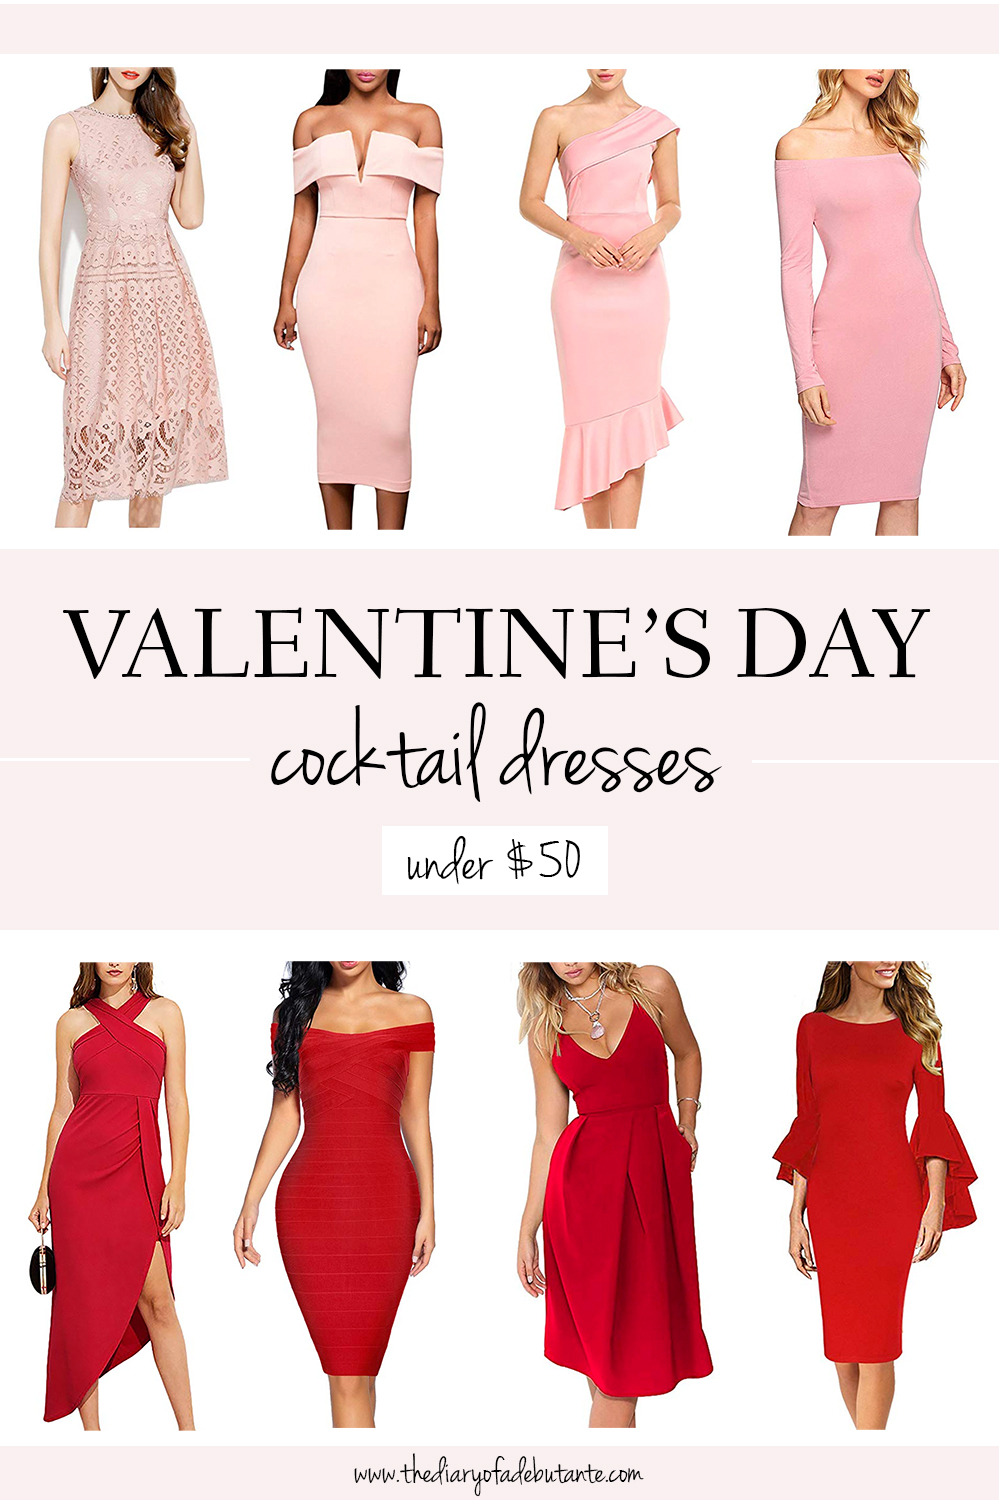 Pink and Red Valentines Day Dresses under 50 by affordable fashion blogger Stephanie Ziajka from Diary of a Debutante, red bridesmaid dresses under 50, cheap red bridesmaid dresses under 50 dollars, cheap pink bridesmaid dresses under 50